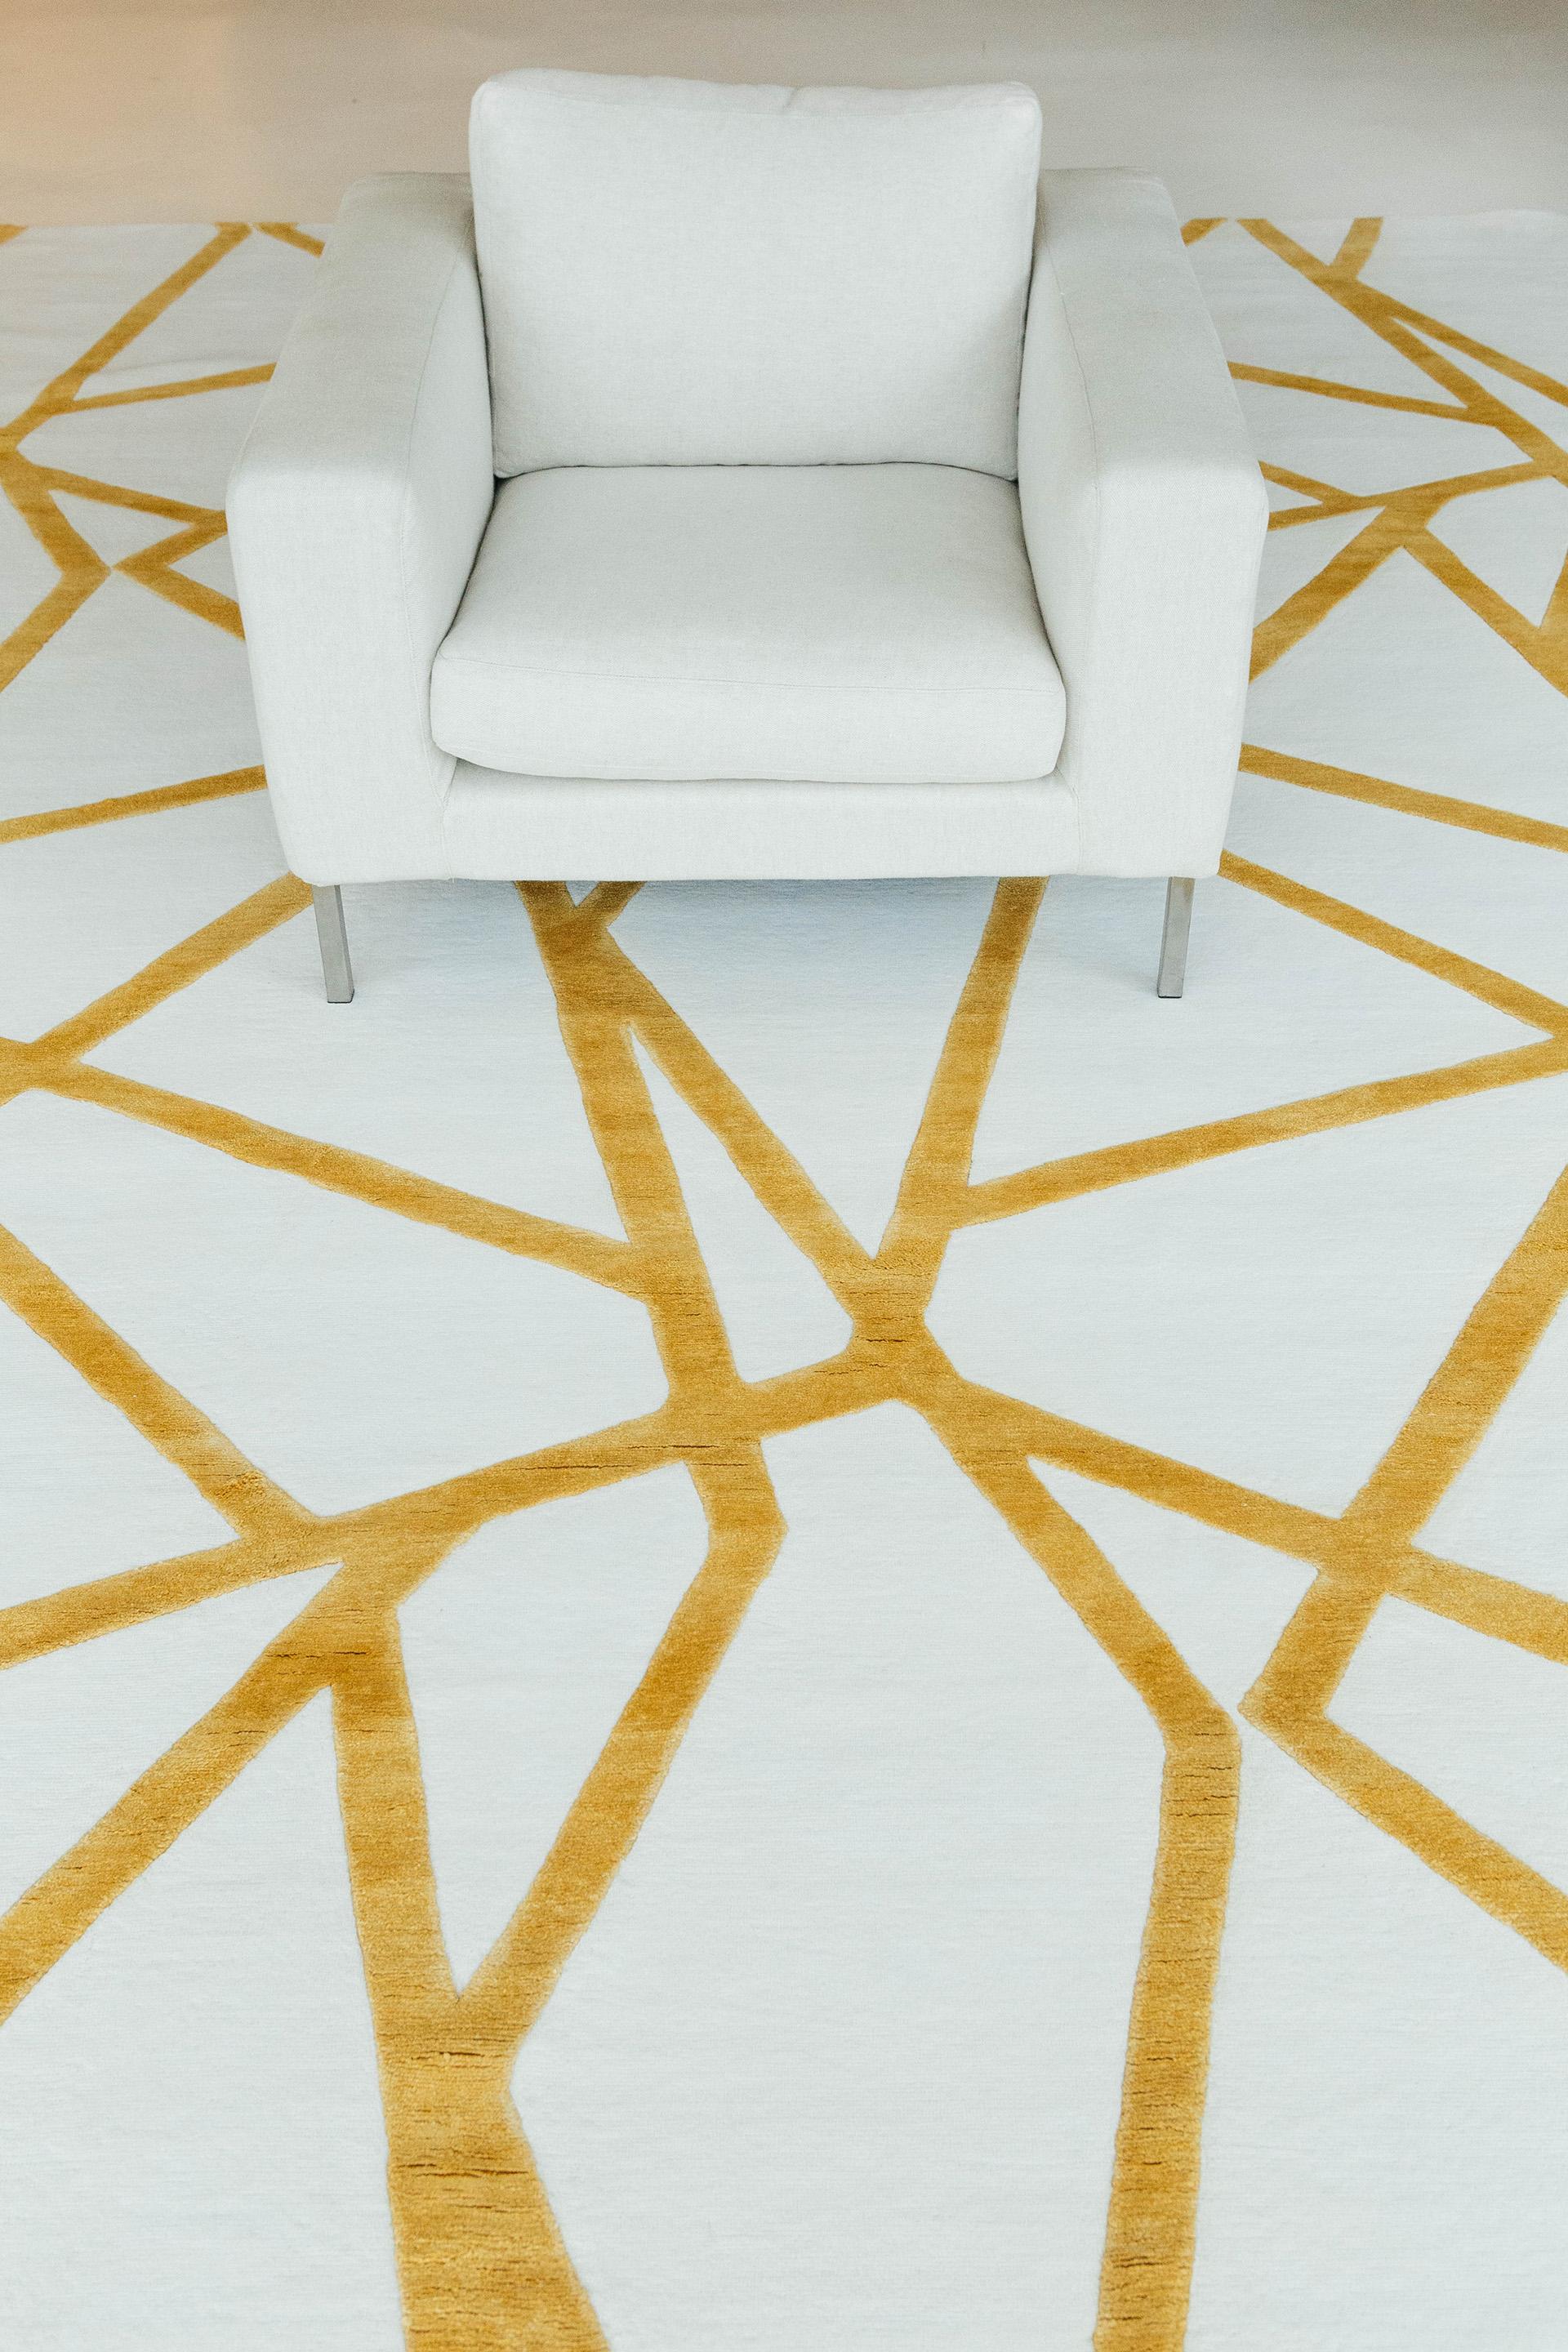 Crisp bands of silk angle across the surface of Bodhi Bar, a contemporary geometric design, here in ivory and vibrant gold.

One of Mehraban's signature collections, the Design Rhymes Collection is crafted to harmonize with the spaces we live